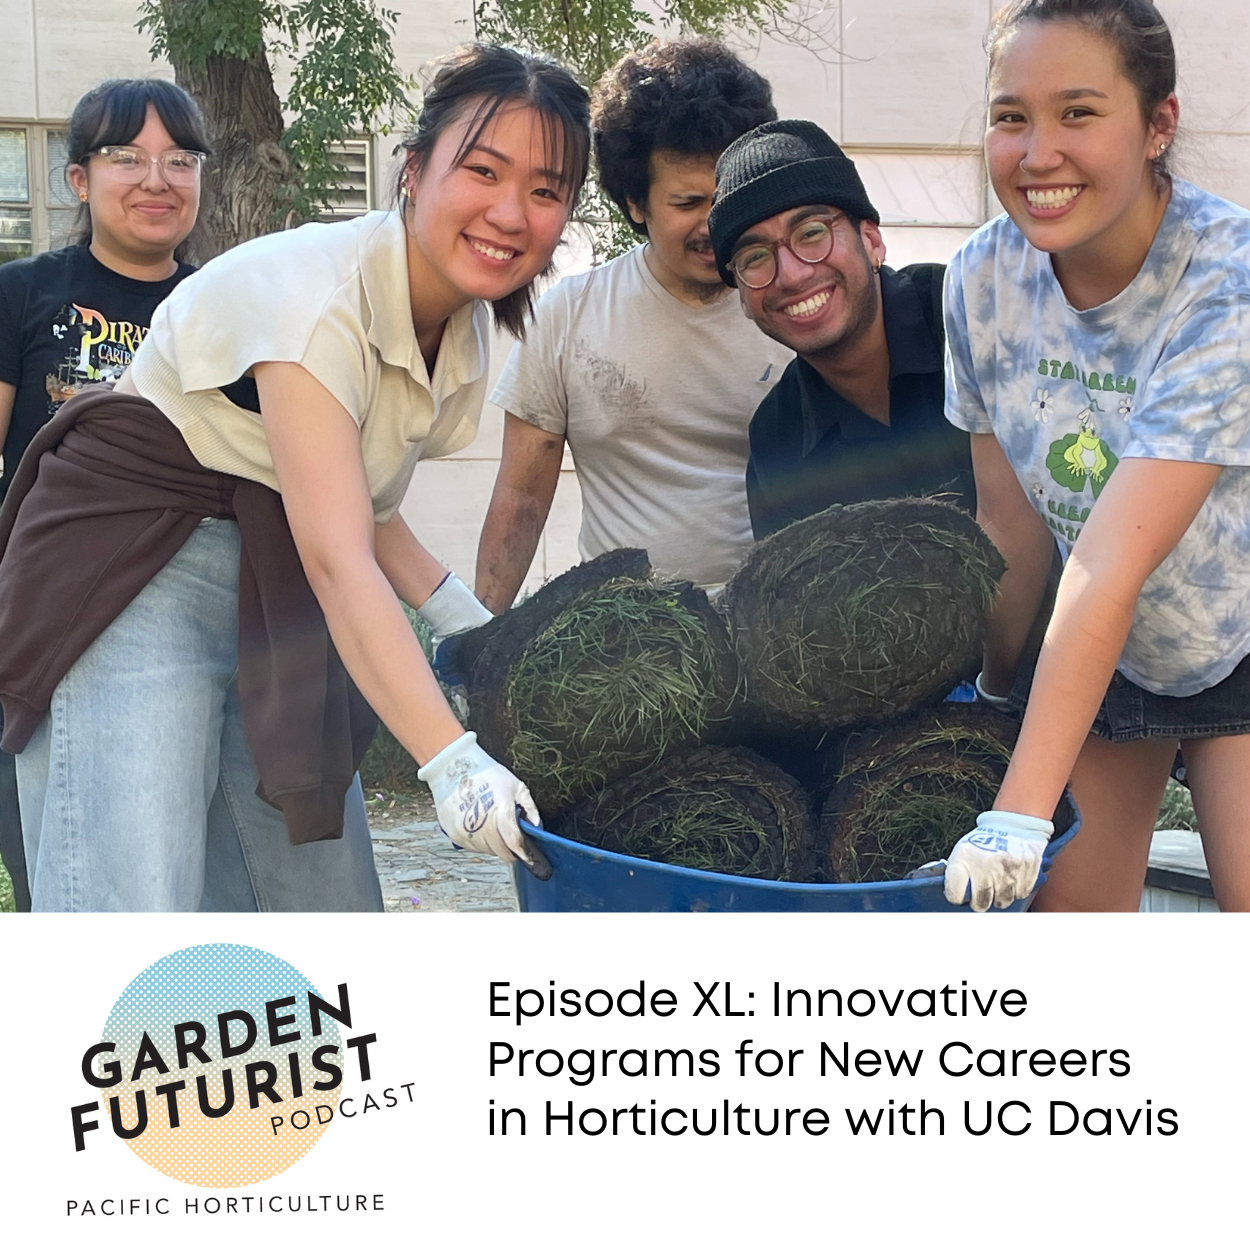 Episode XL: Innovative Programs for New Careers in Horticulture with UC Davis